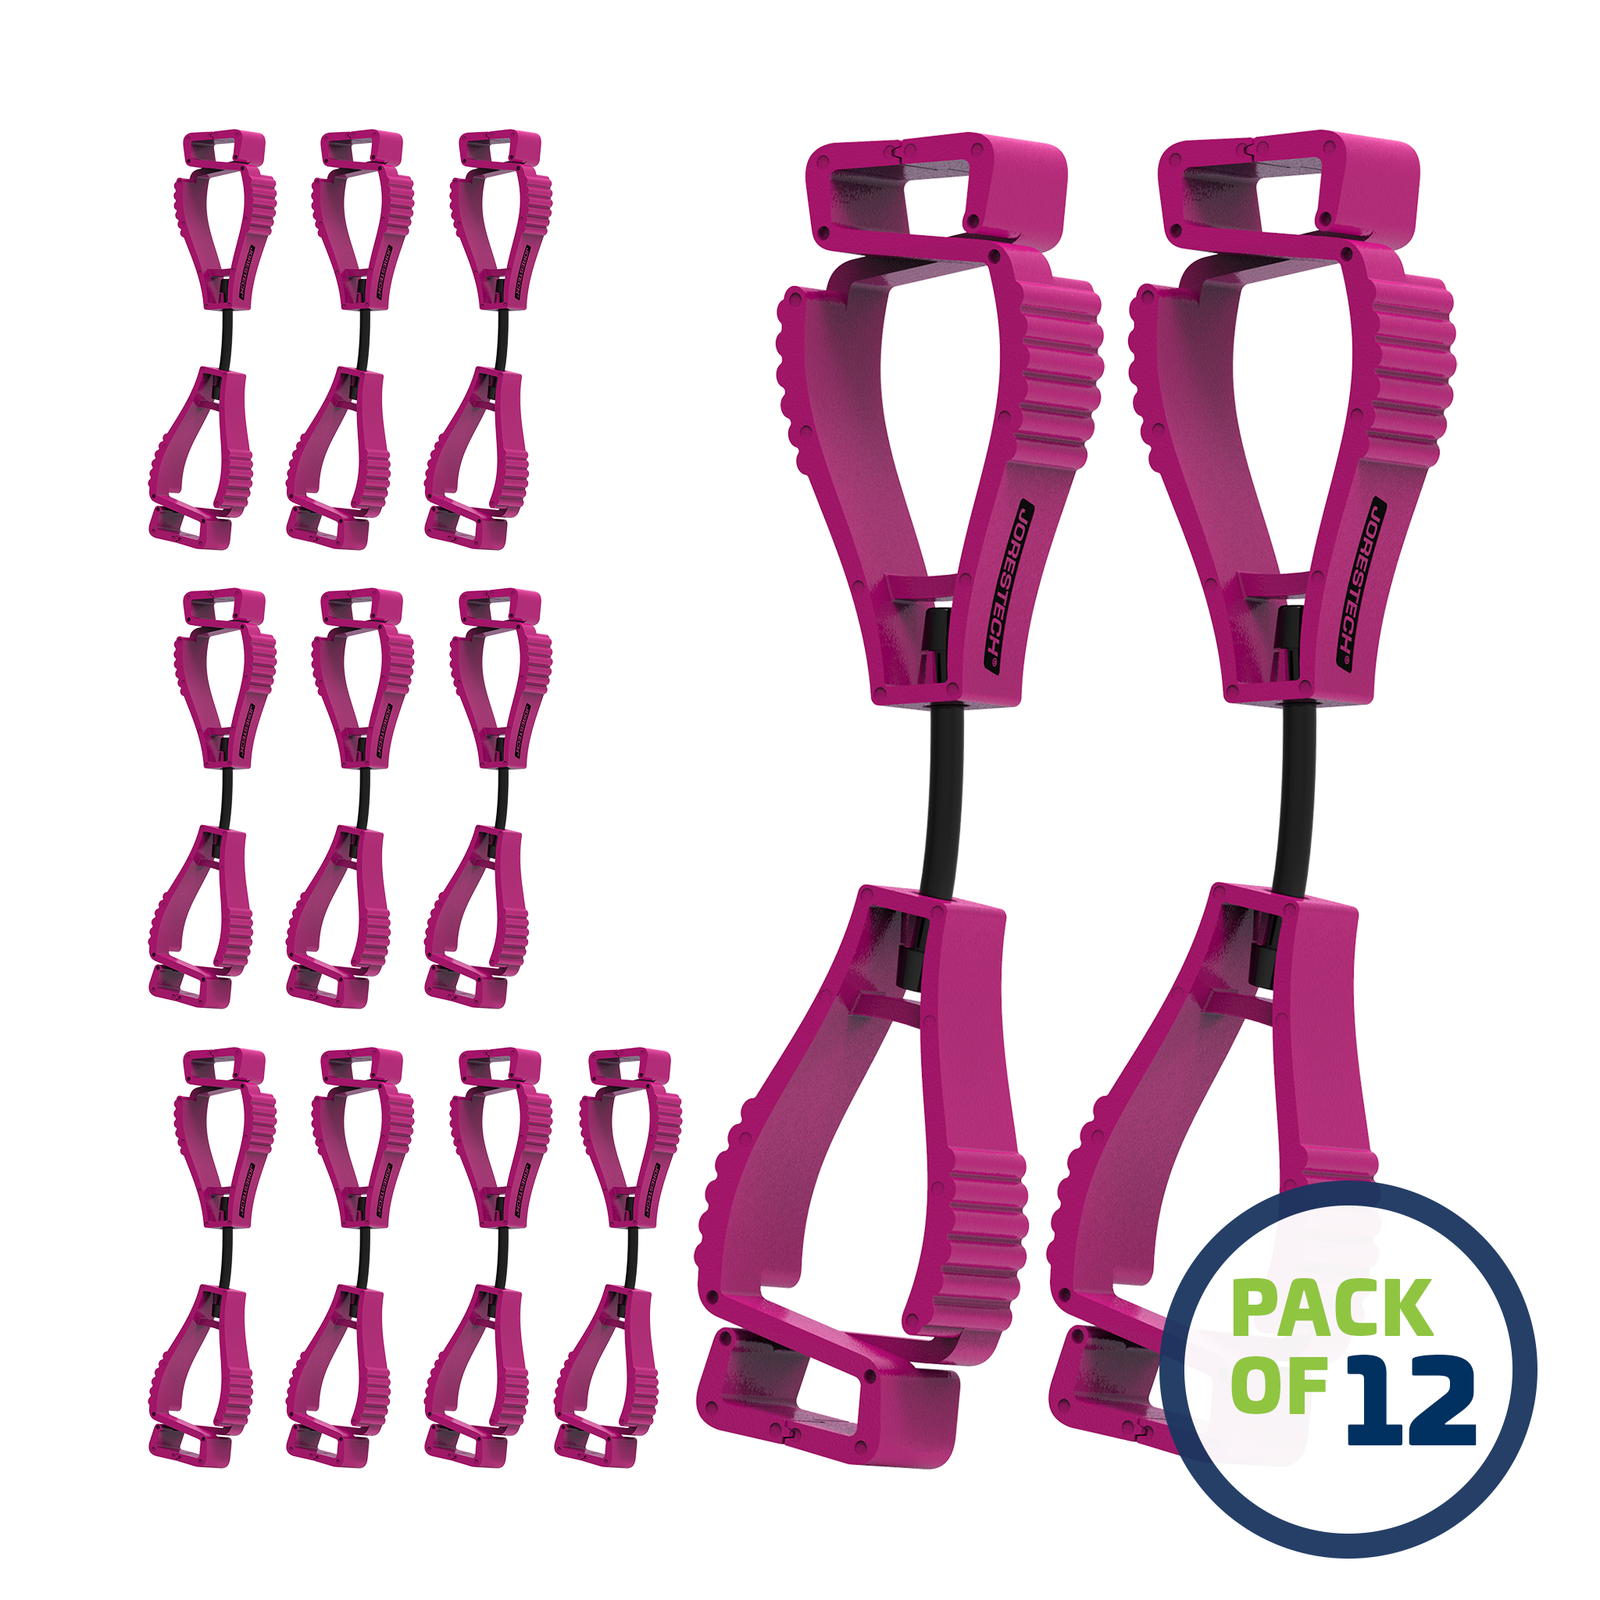 Pack of 12 Pink JORESTECH clip safety holders